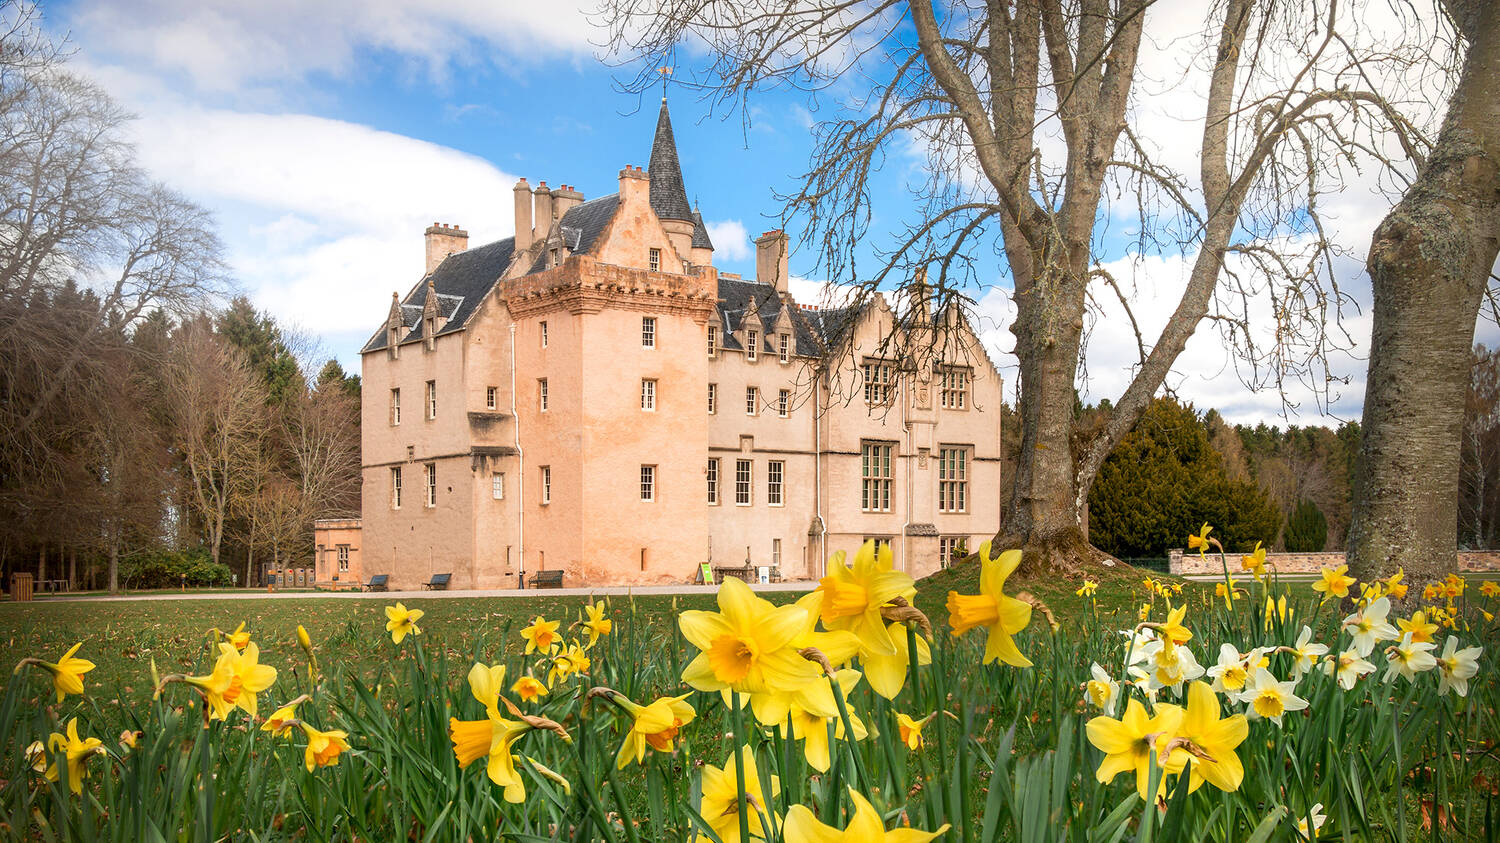 Daffodils in front of Brodie Castle in springtime